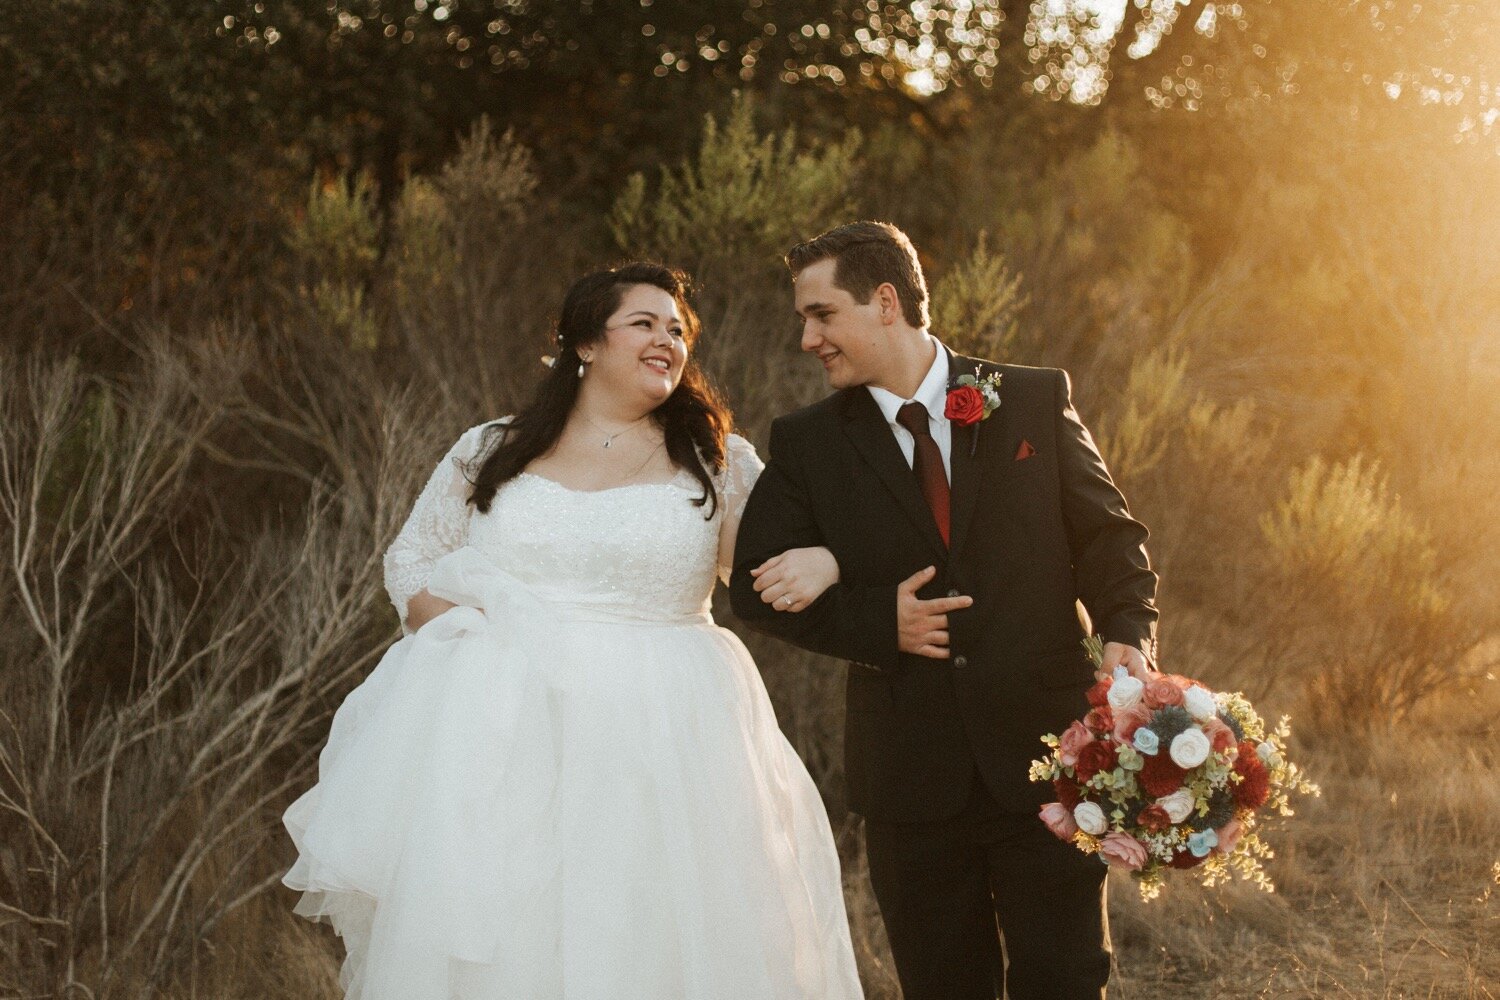  bride and groom excitedly walk arm in arm after getting married in an intimate nipomo wedding, captured by slo wedding photography duo poppy and vine 